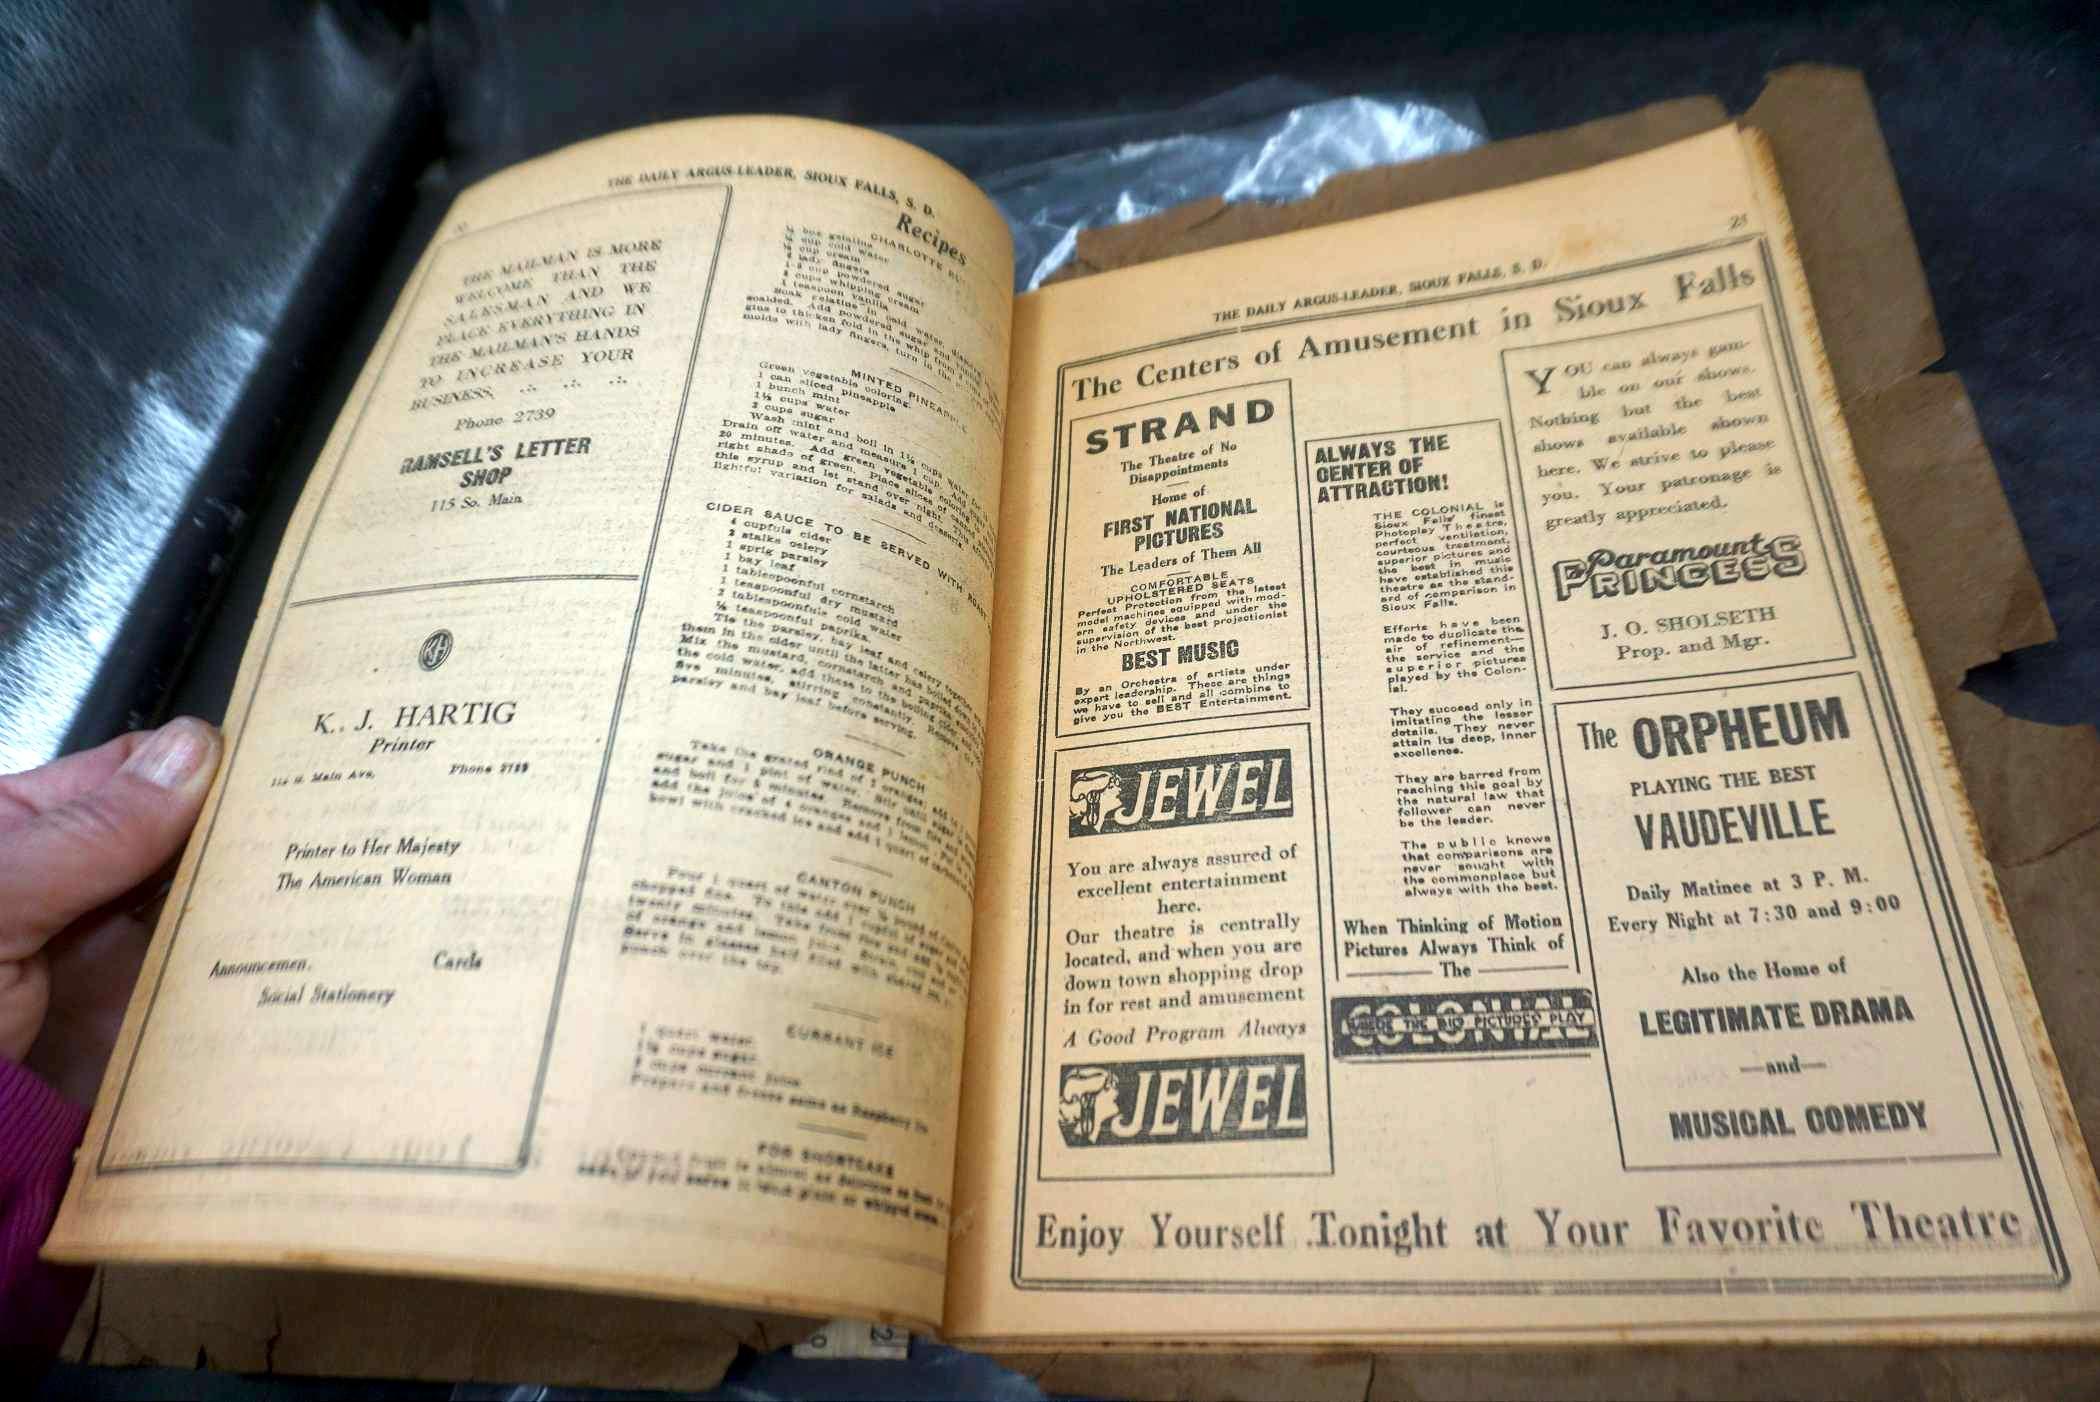 1925 The Daily Argus-Leader Cook Book